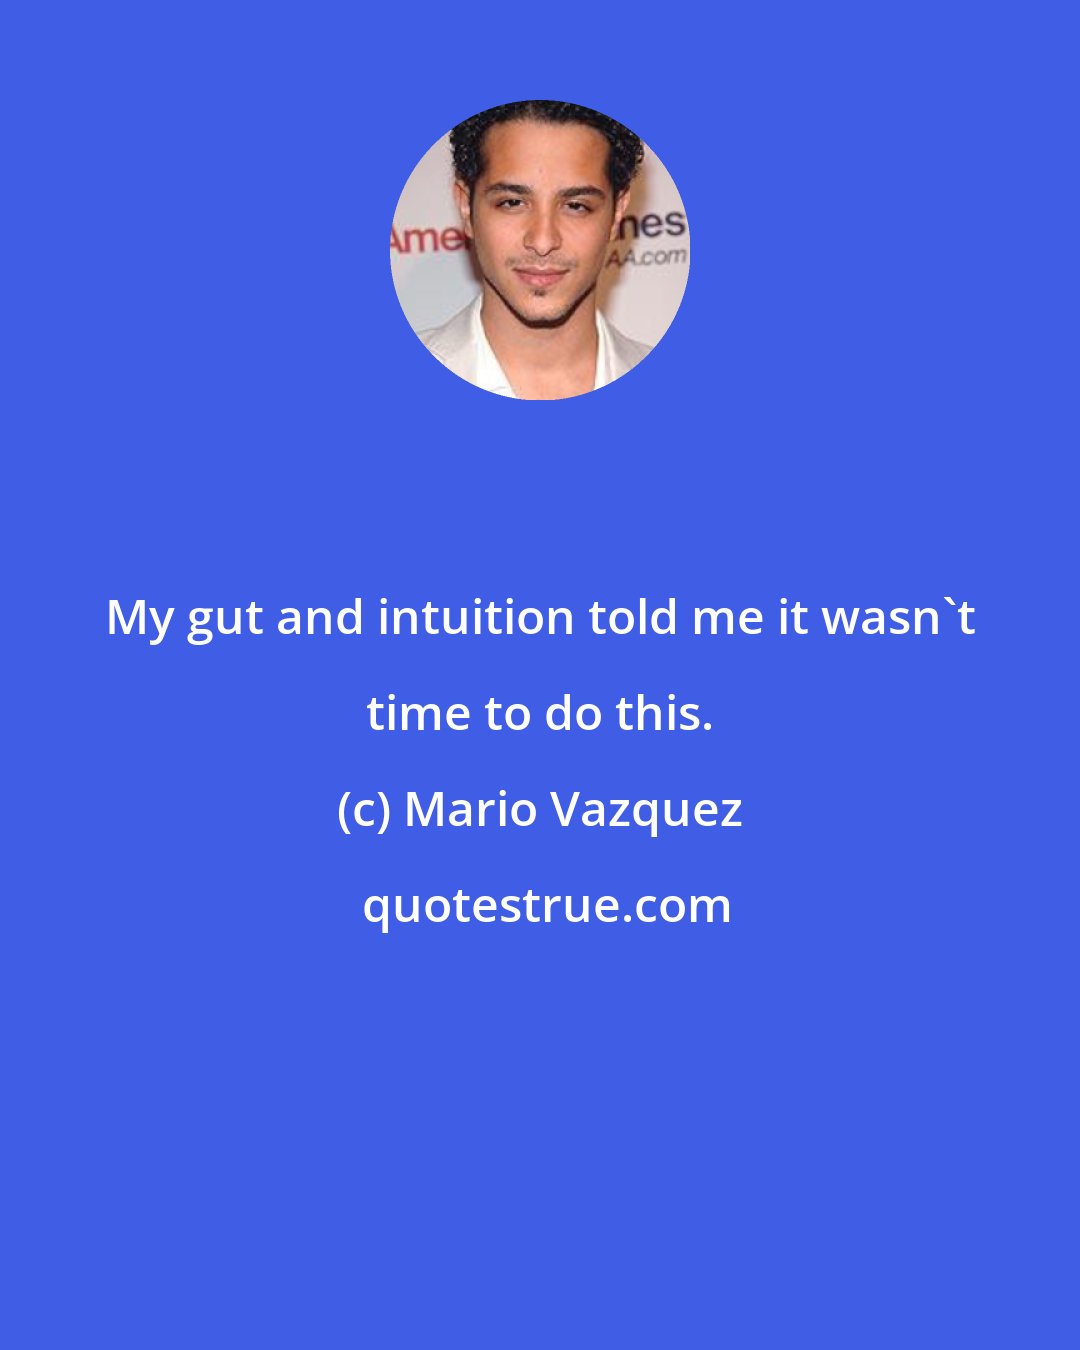 Mario Vazquez: My gut and intuition told me it wasn't time to do this.